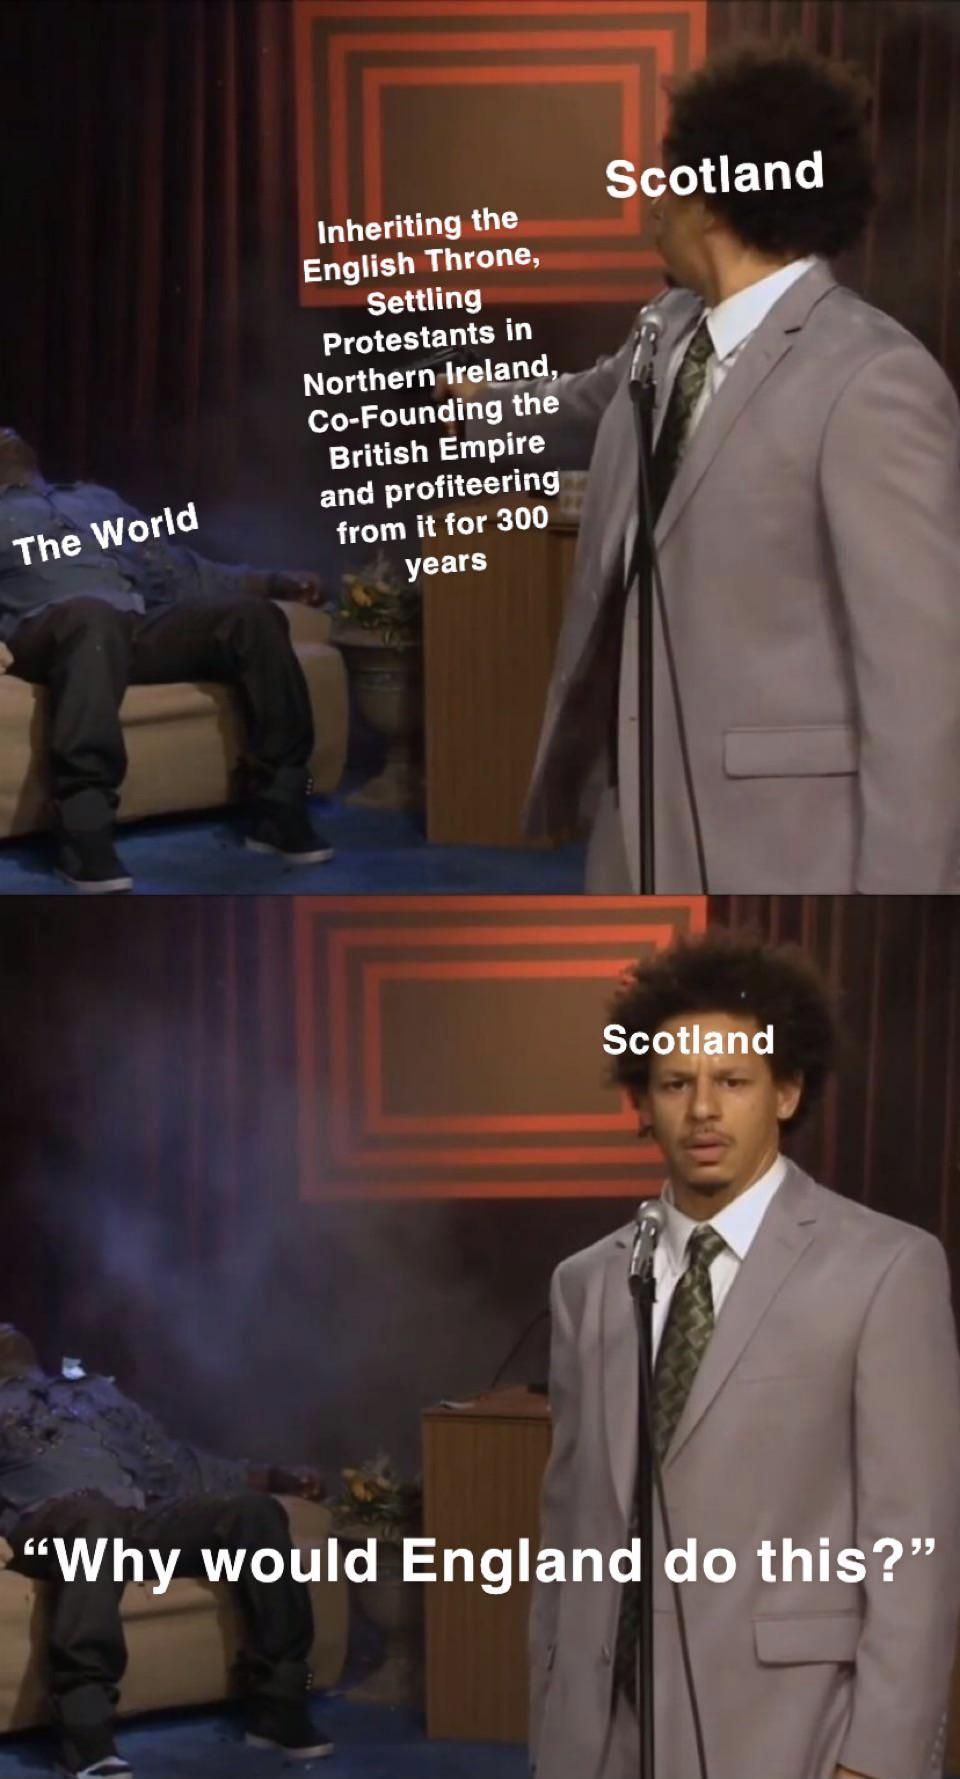 When in doubt, blame England